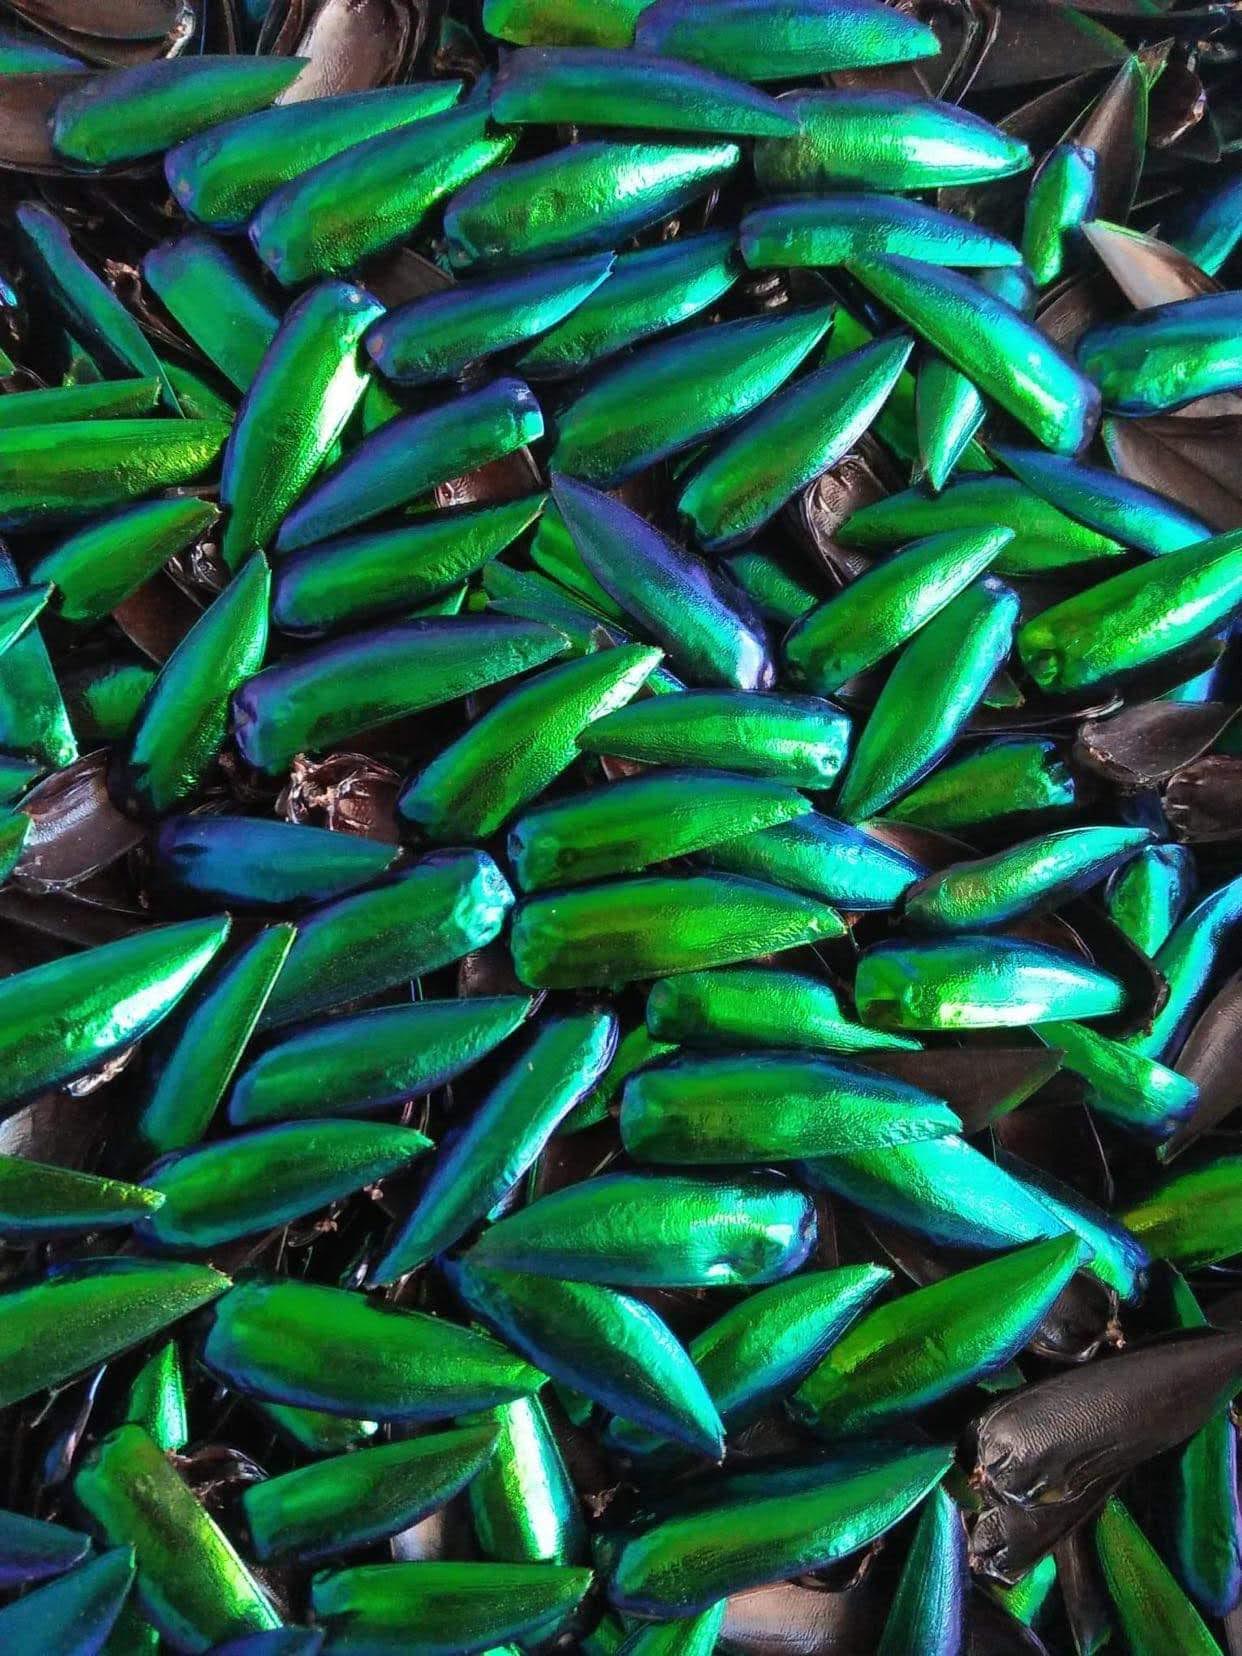 Jewel Beetle Wings UNDRILLED NO-HOLE 100 Pcs Natural Wings - Metallic Iridescent Green